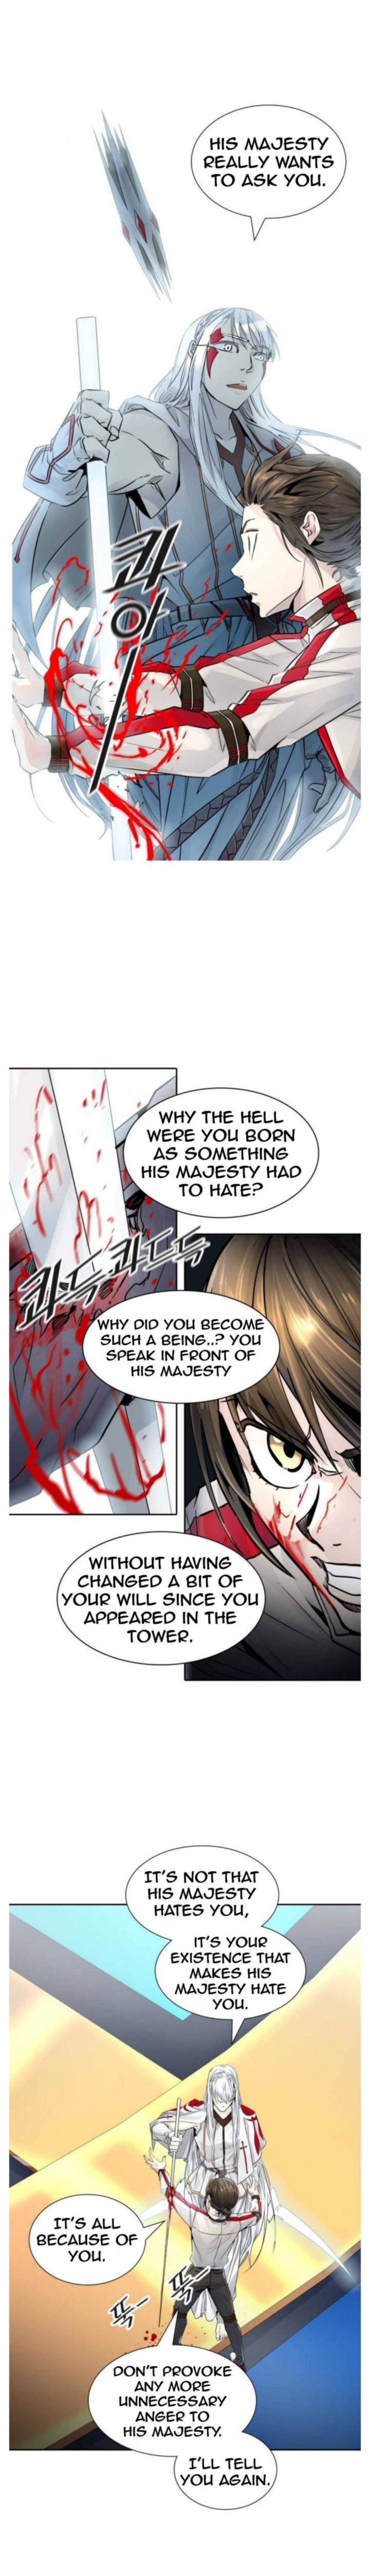 Tower Of God 498 2